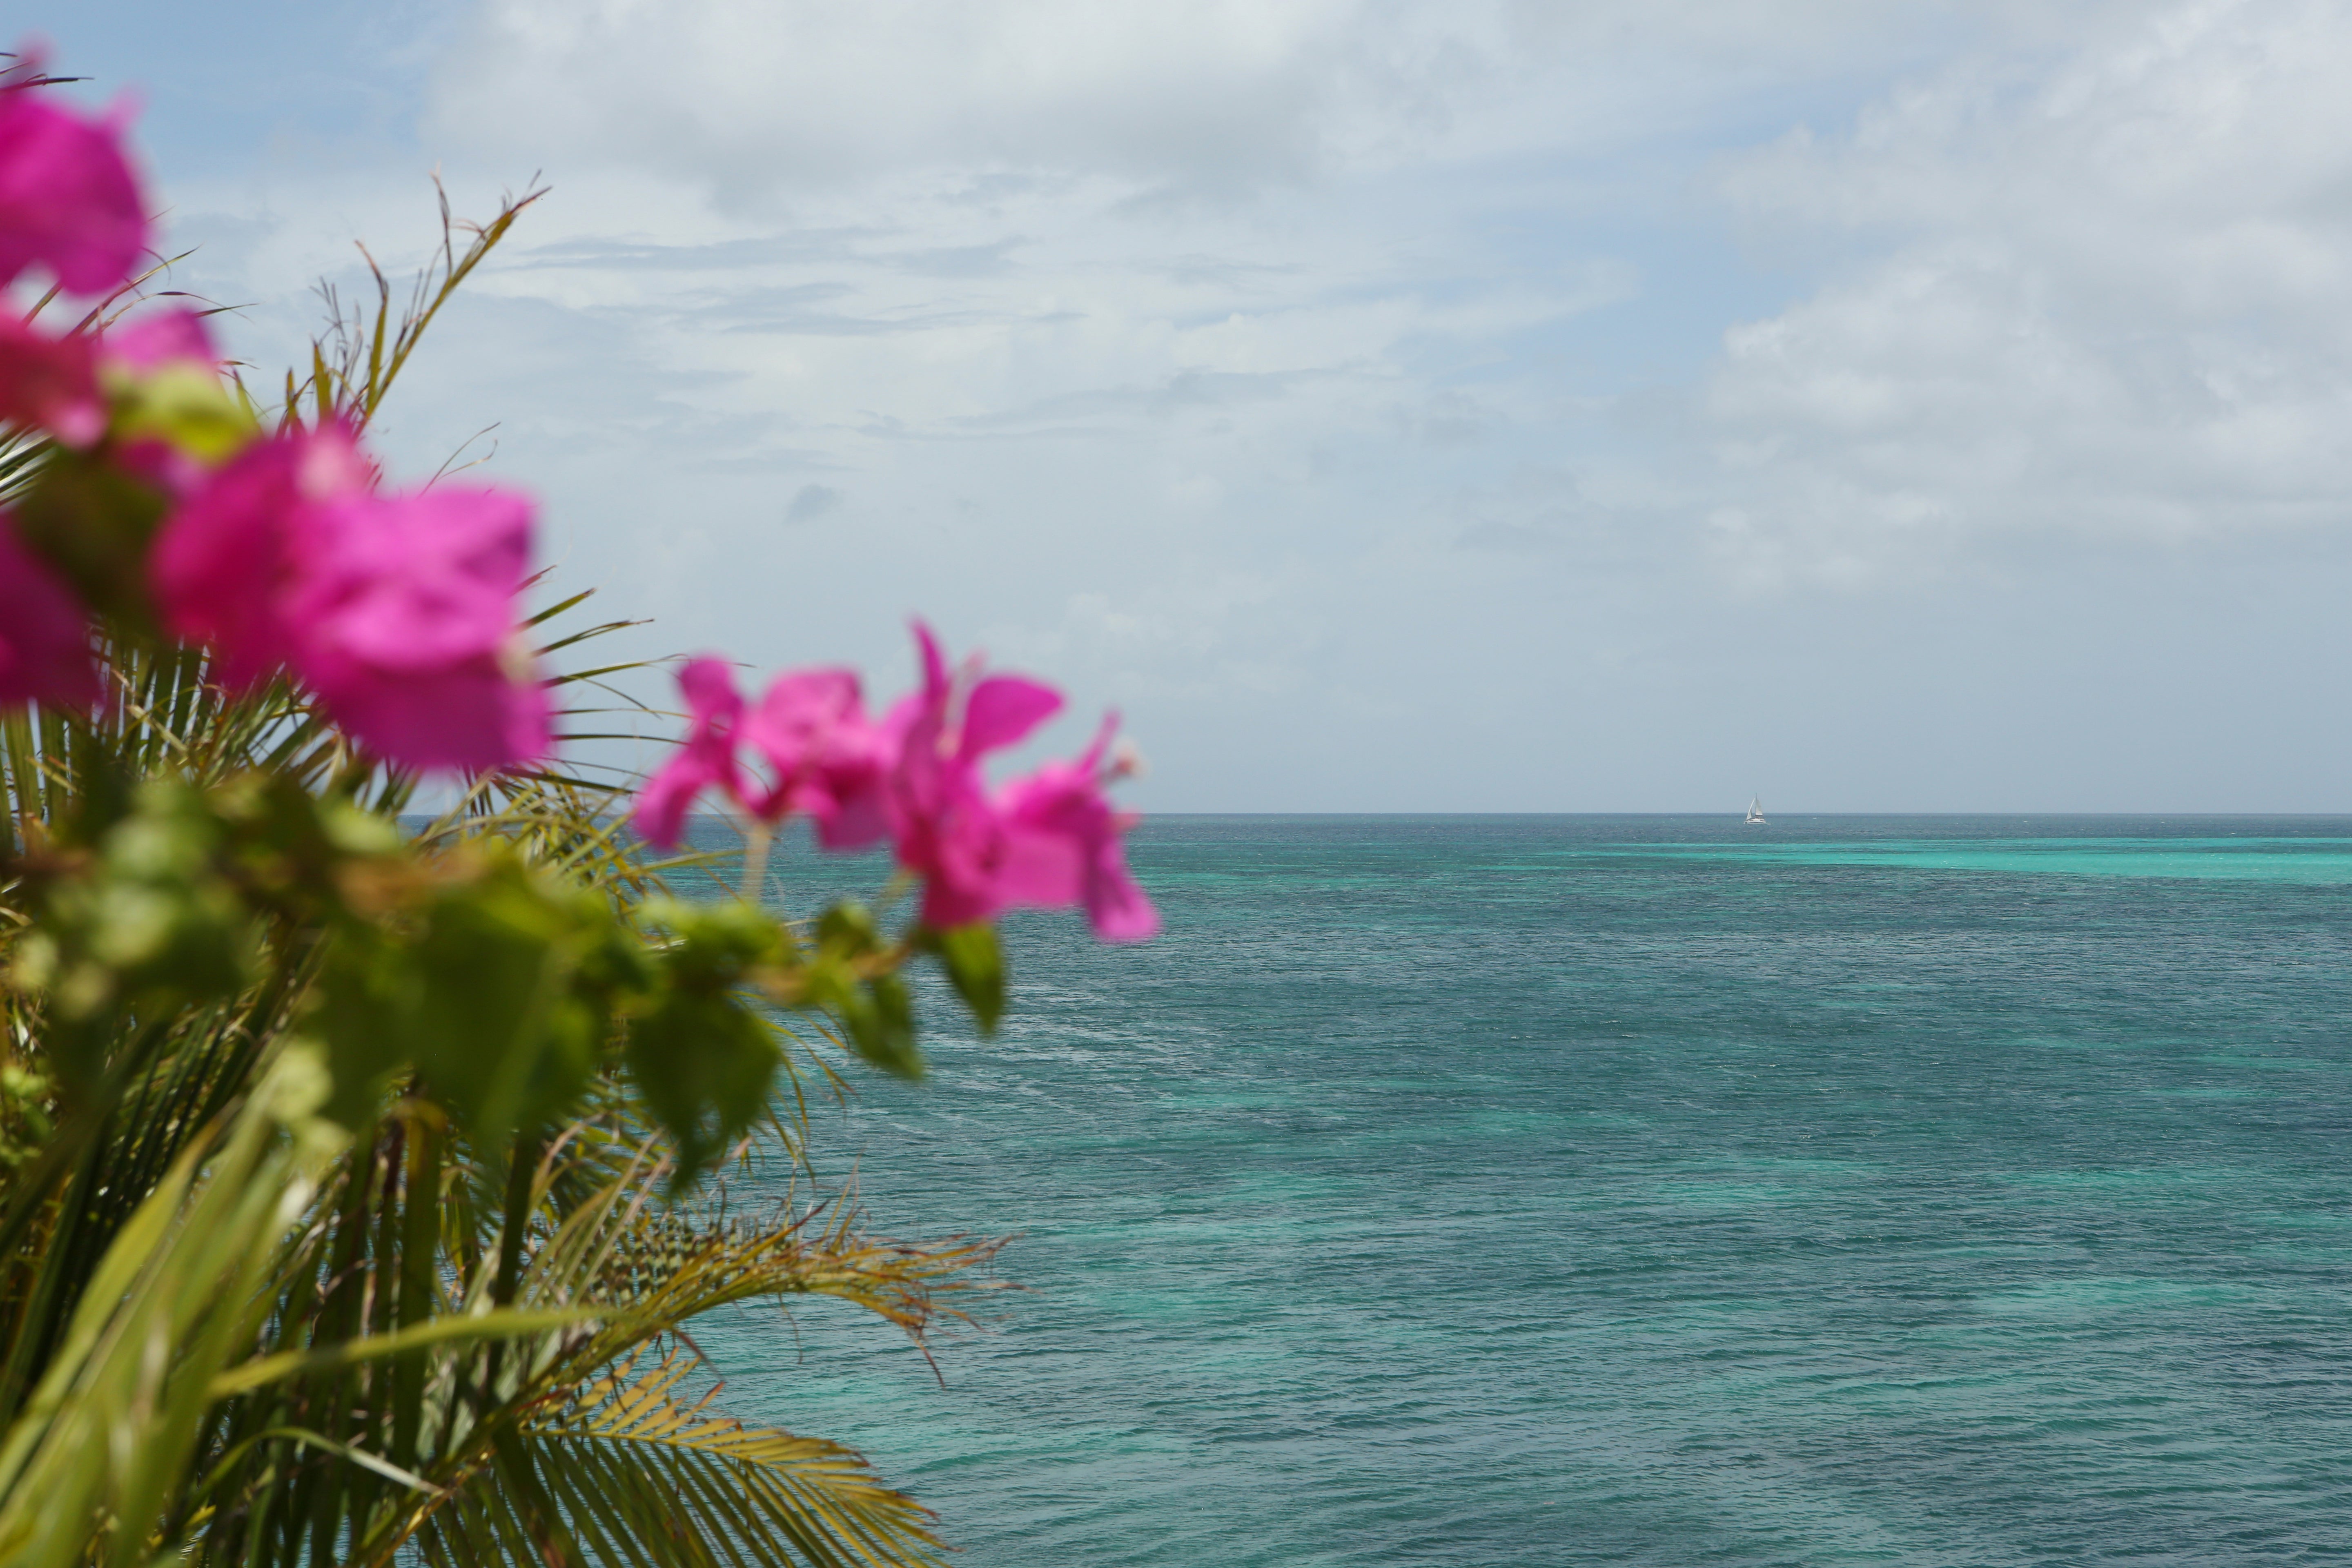 The view out to sea from Sheer Rocks at Cocobay Resort on the west coast of Antigua. Picture date: Saturday, July 24, 2021. Photographer: Johnny Green/PA